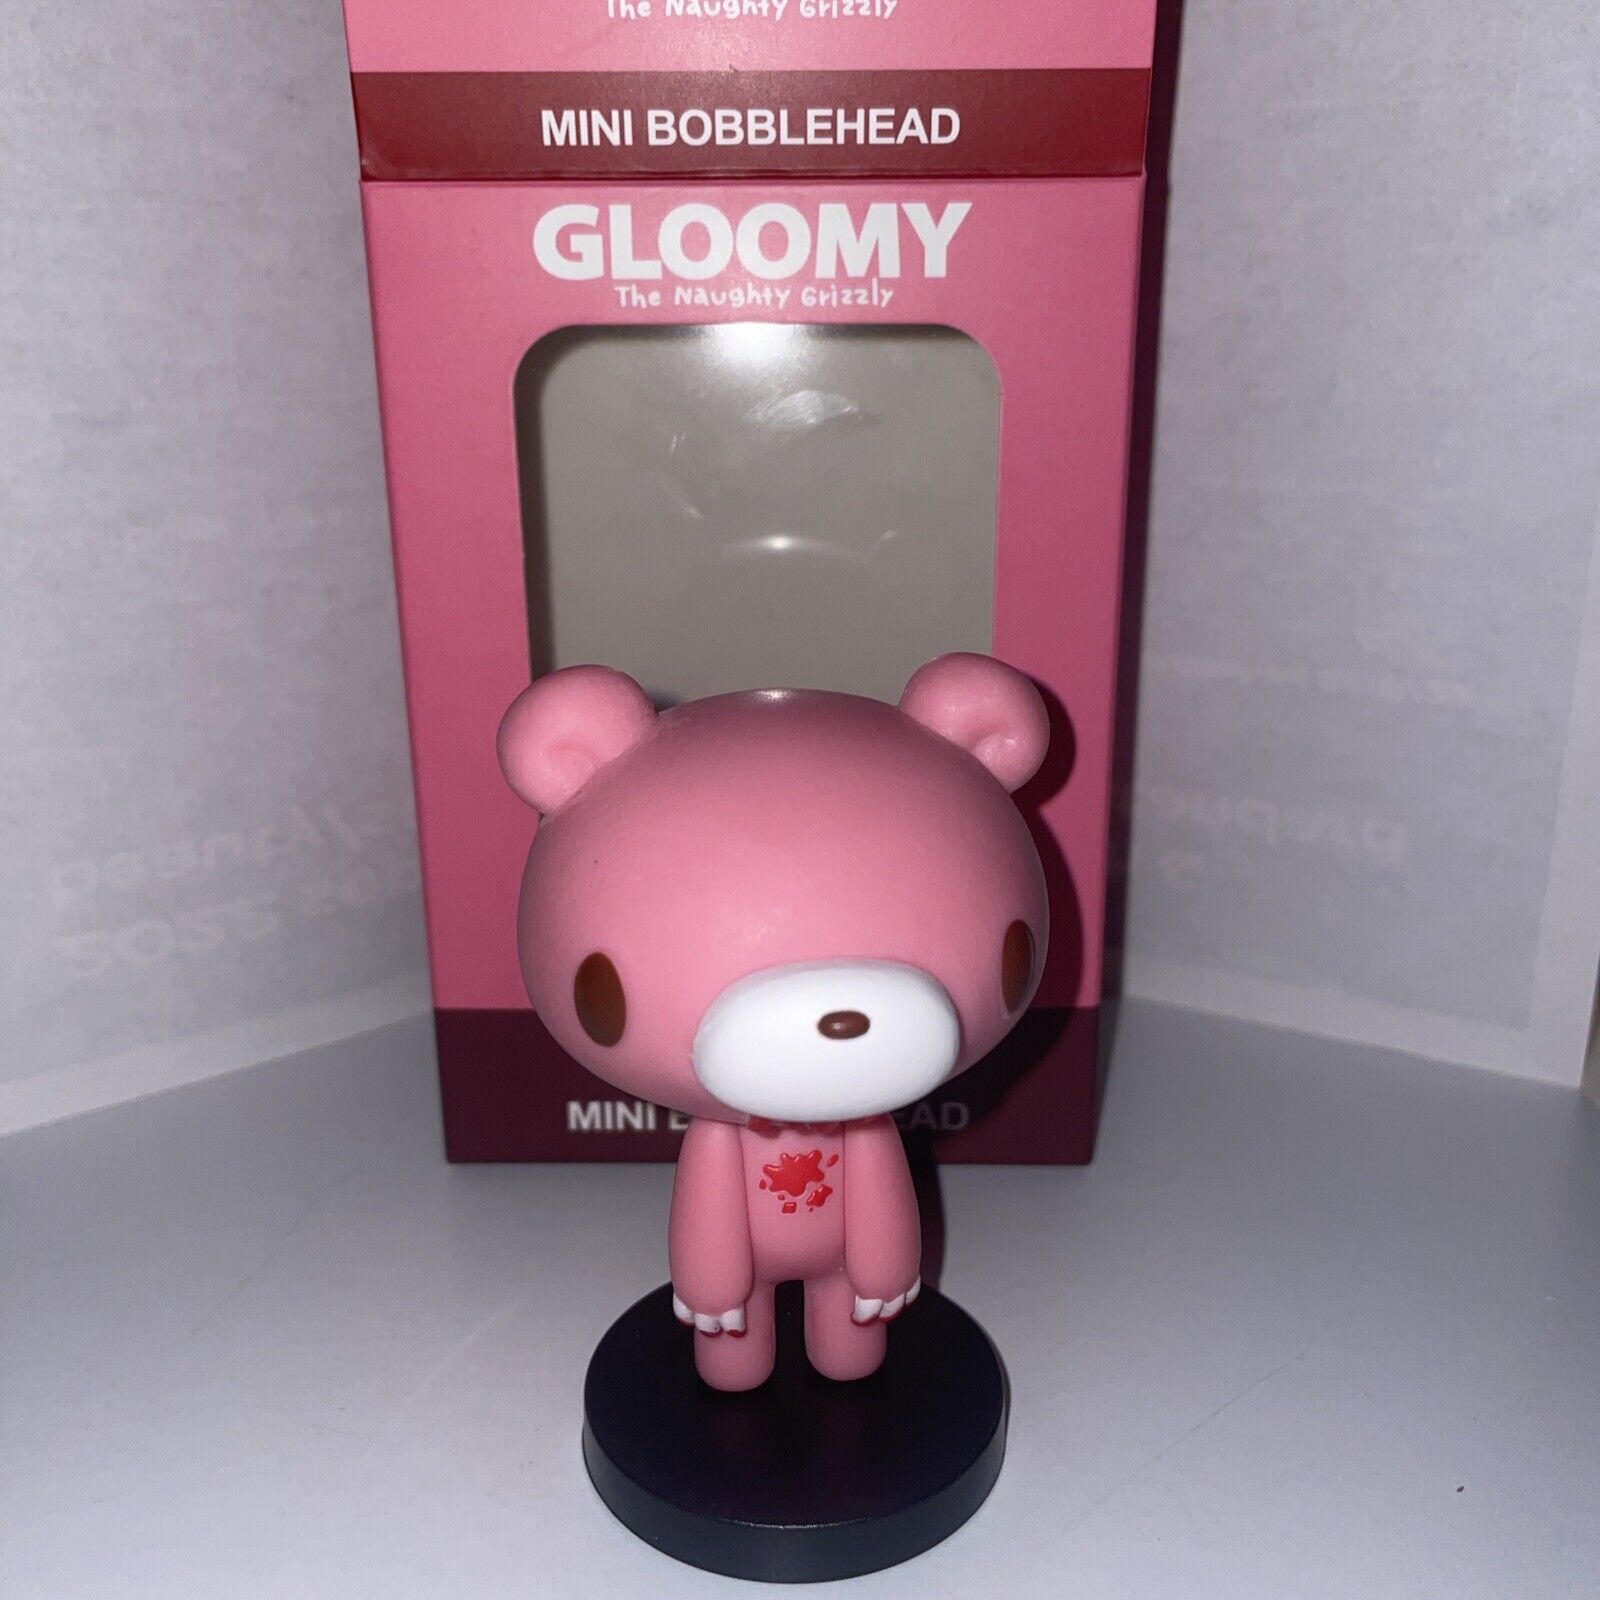 Culturefly Pink Gloomy Bear (The Naughty Grizzly Bear) 3” Bobblehead Mori Chack